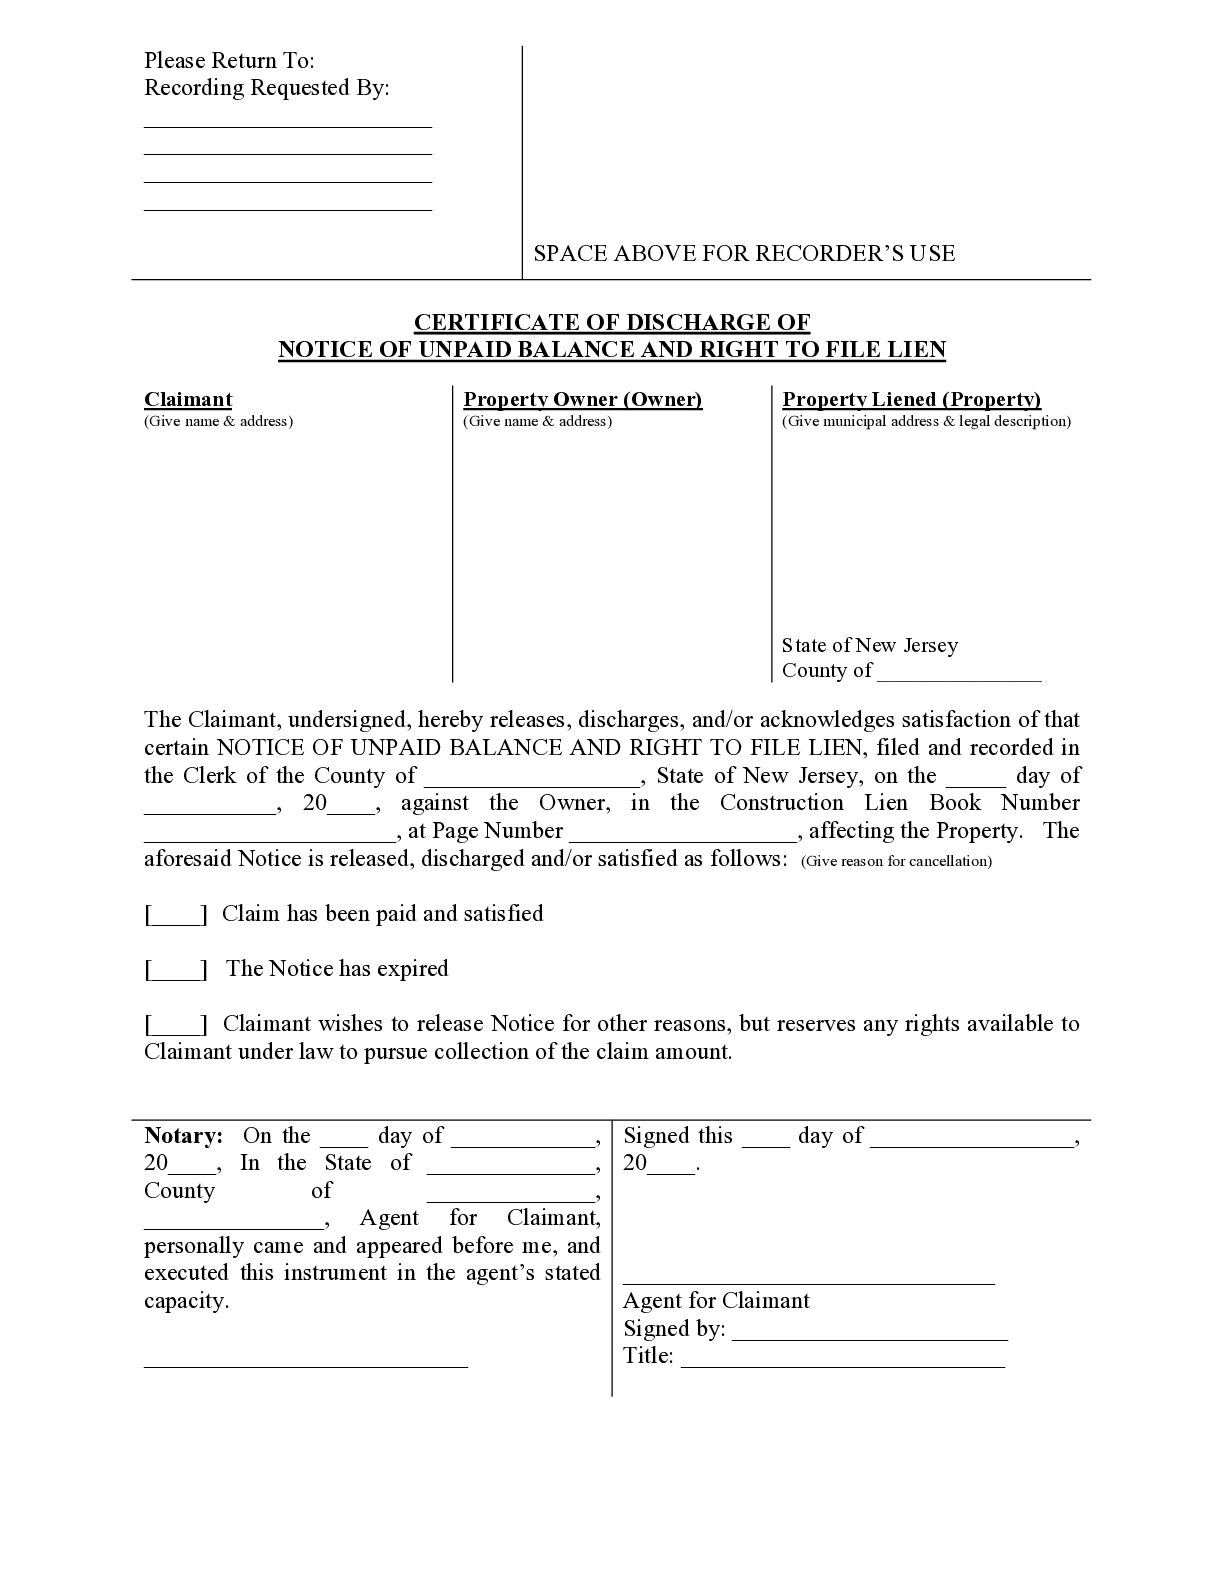 New Jersey Release of Unpaid Balance Notice Form